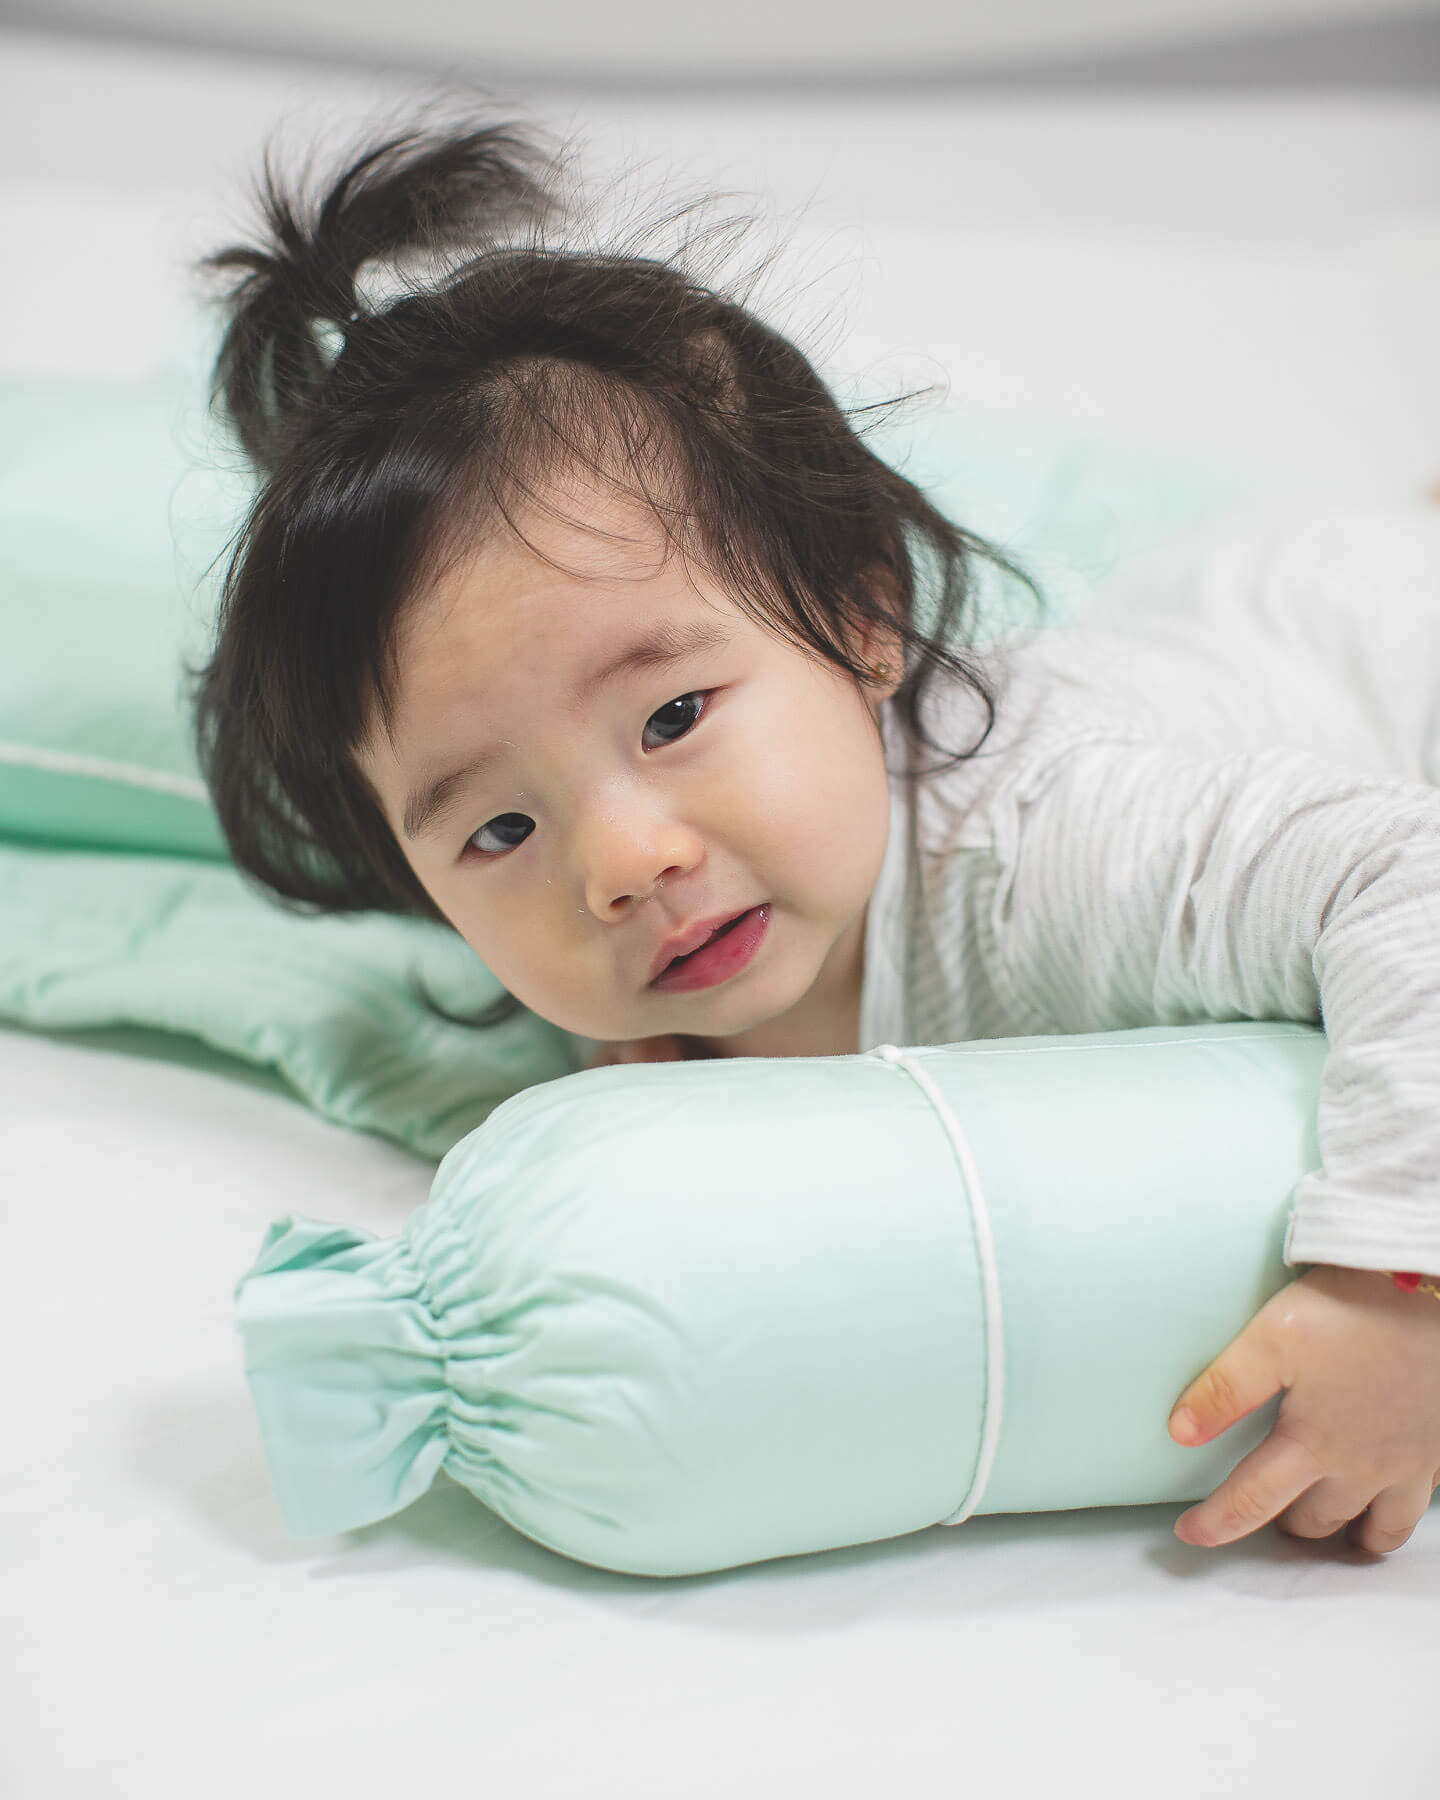 organic bamboo lyocell baby pillowcase set - pillowcase, 2 bolstercases in mint green (green with white piping)